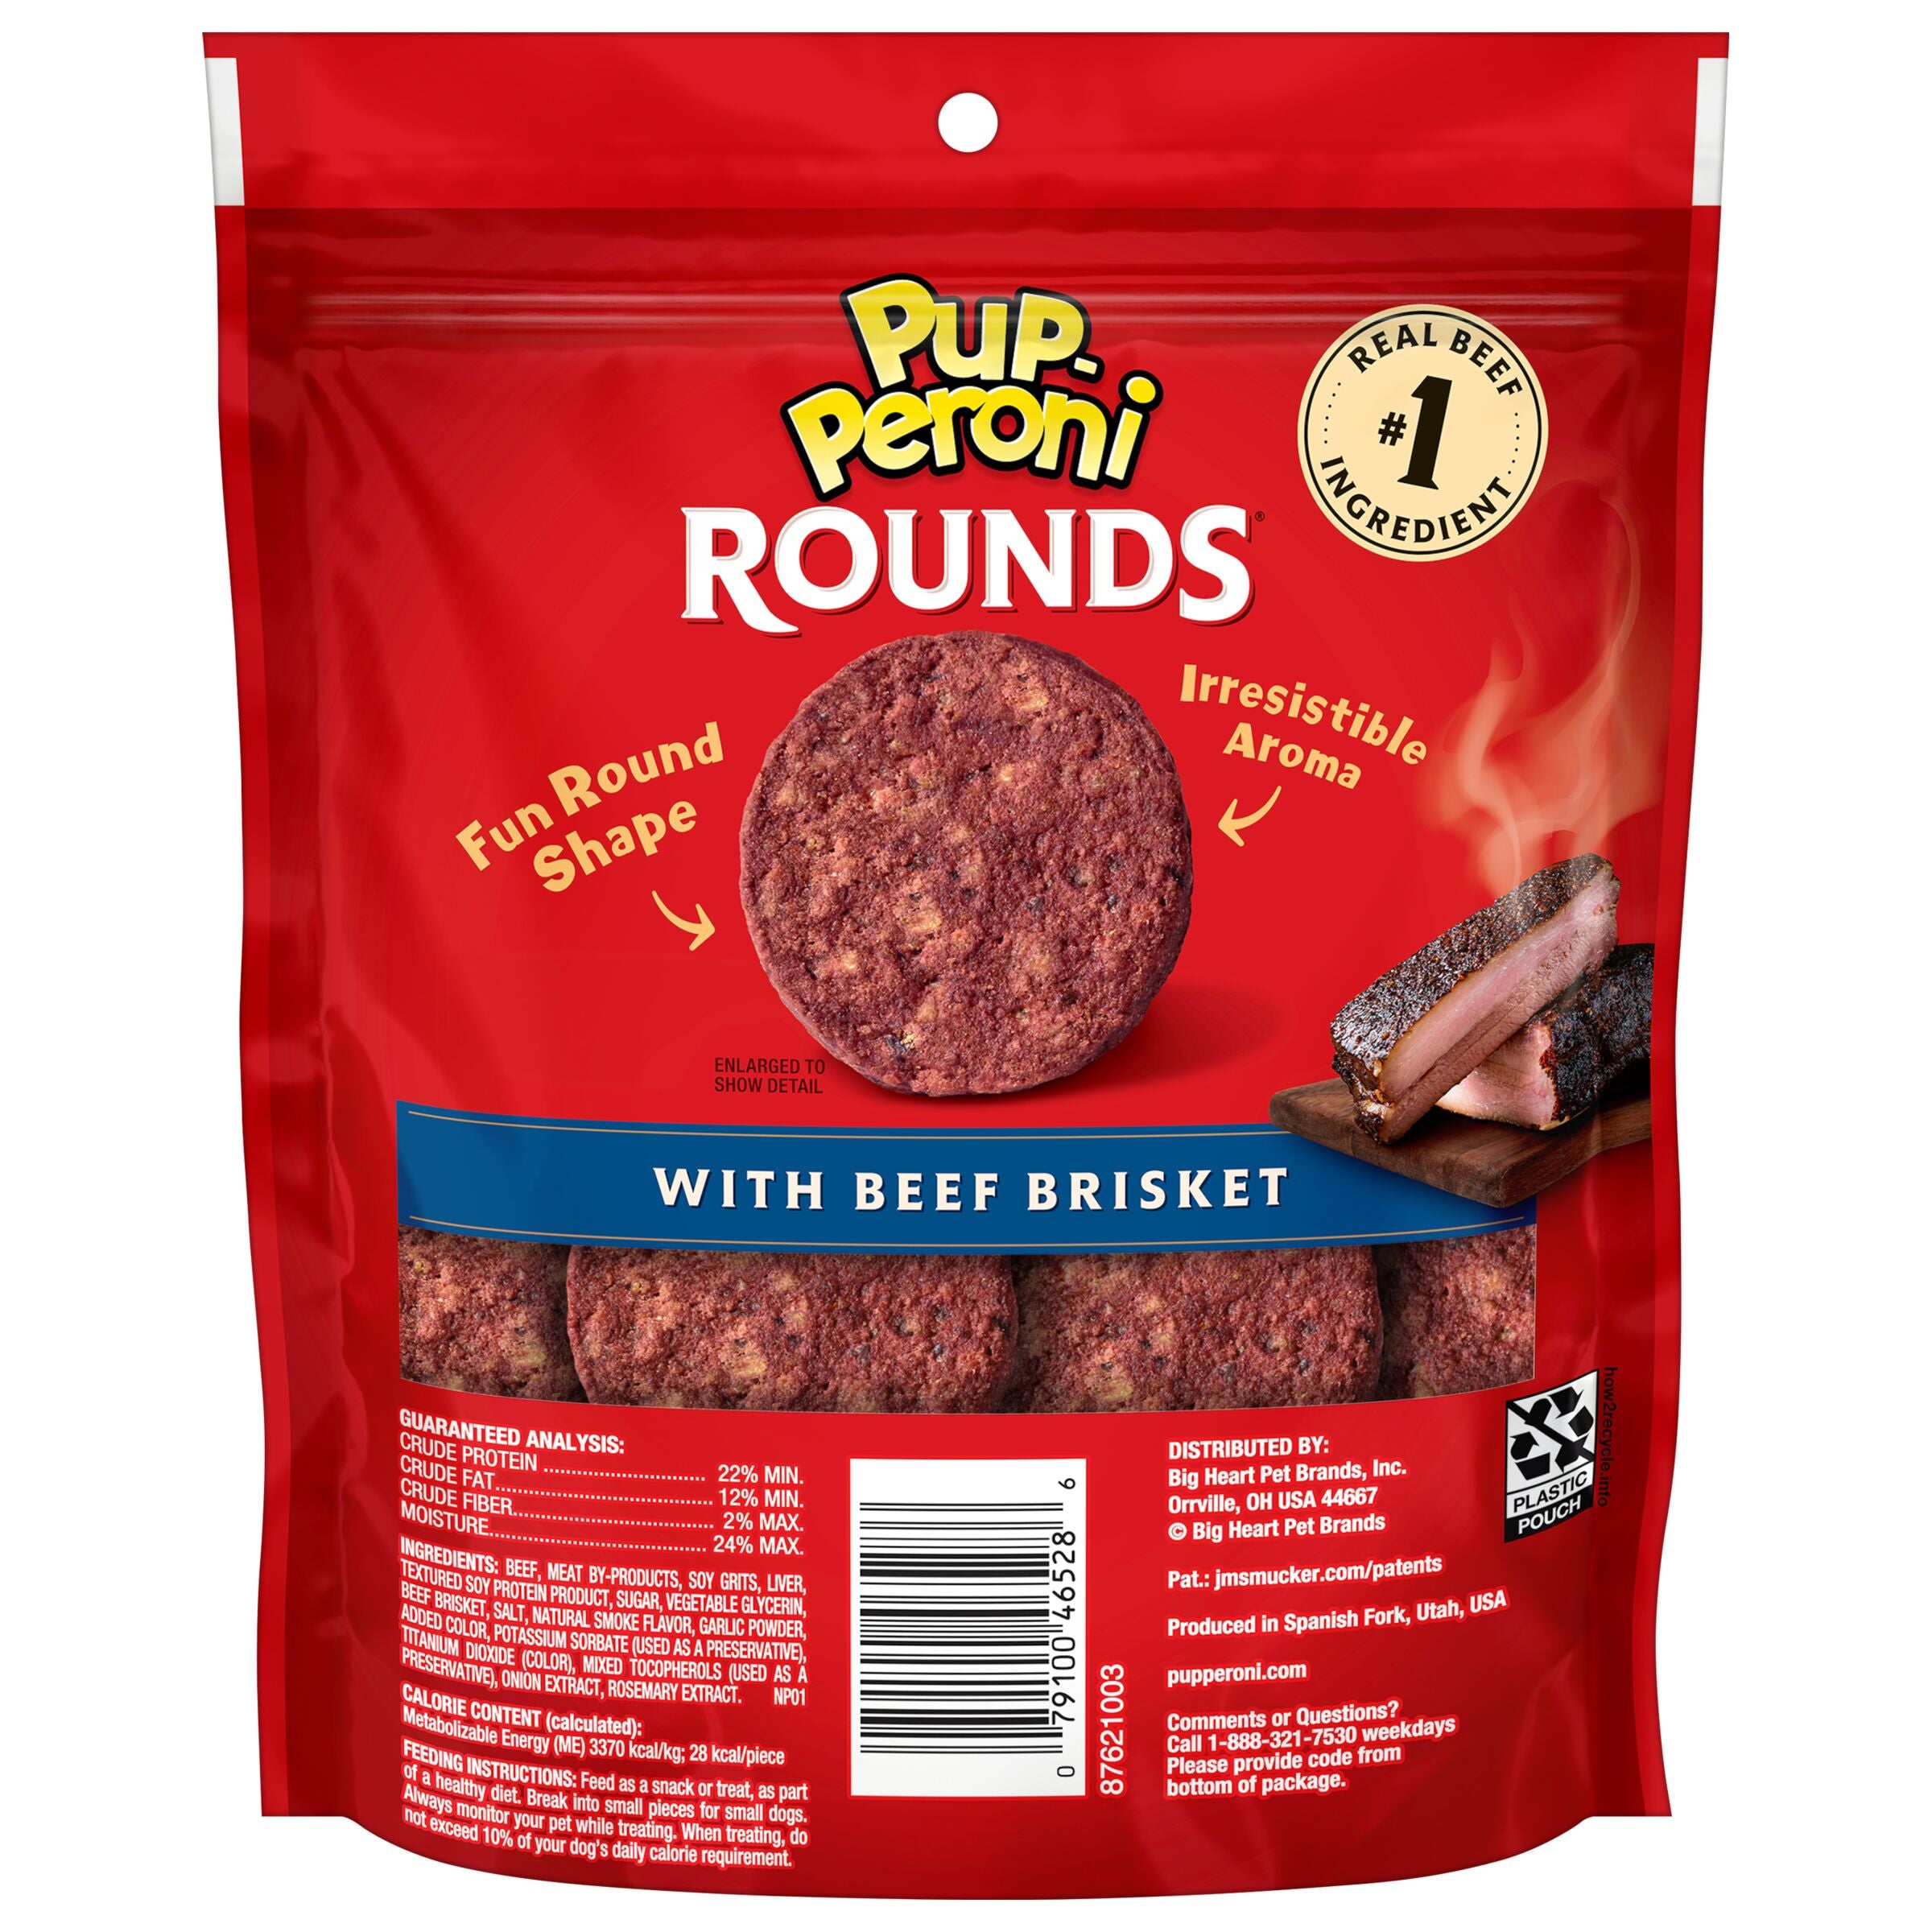 Pup-Peroni Rounds Dog Treats with Beef Brisket, 5 oz